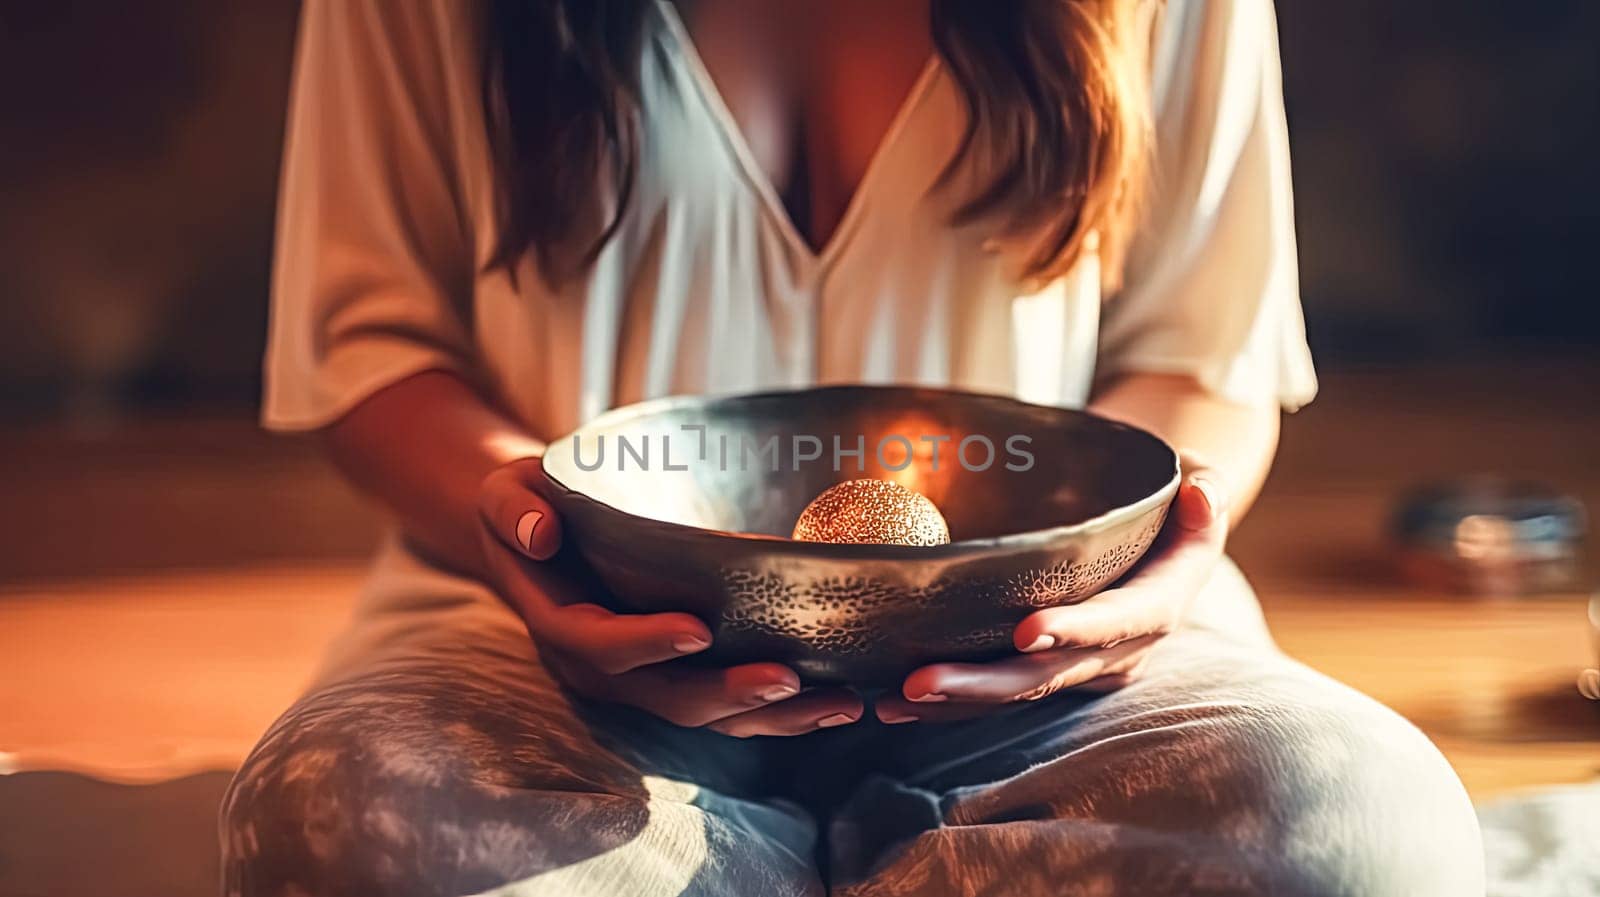 A woman is holding a gold bowl in her hands. The bowl is large and has a shiny, reflective surface. The woman is in a relaxed and peaceful state, possibly meditating or enjoying a moment of solitude